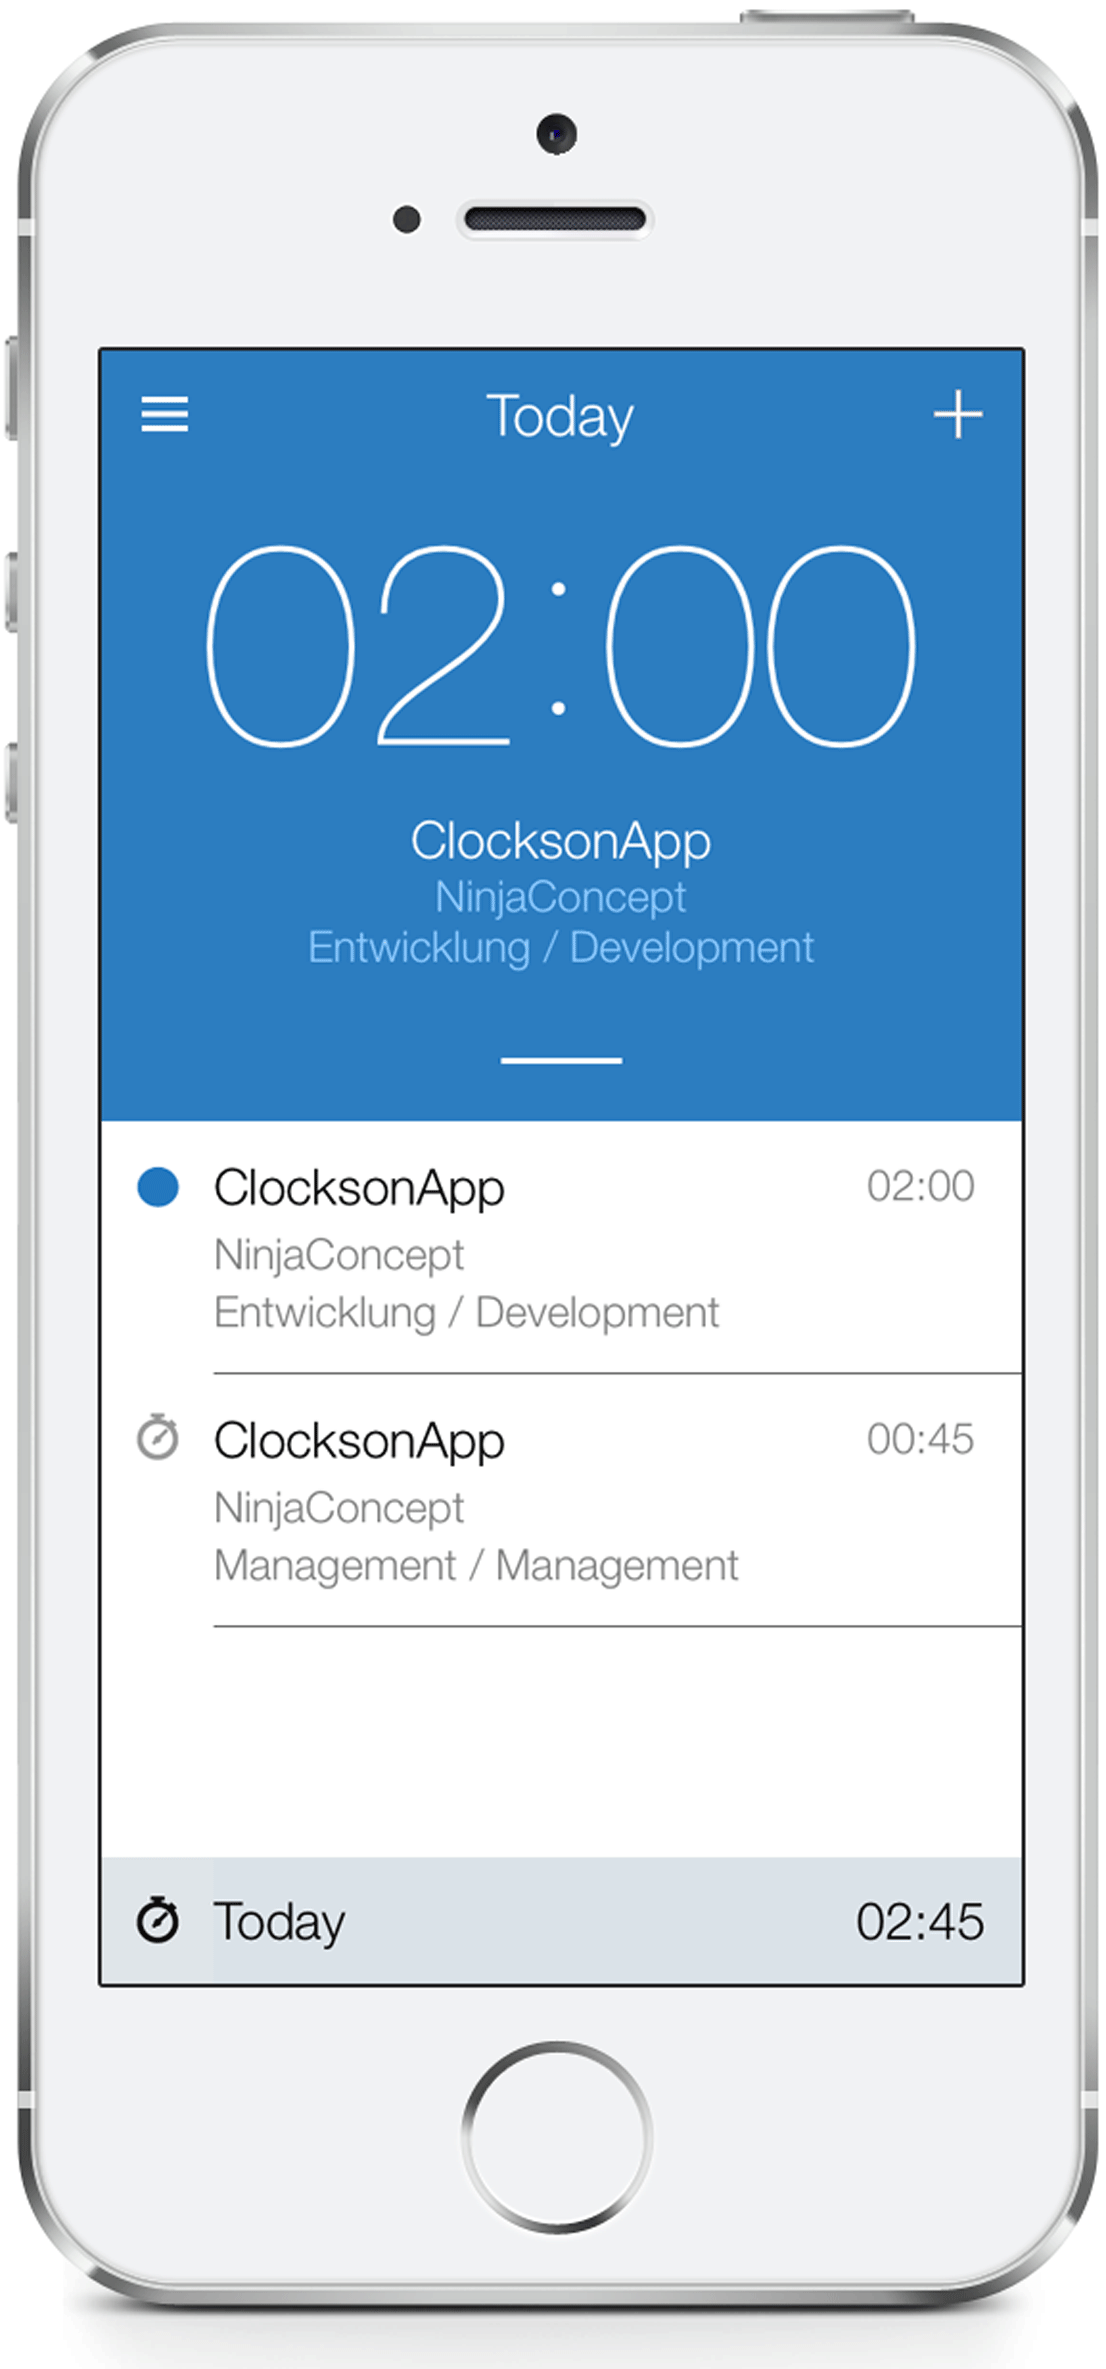 Time tracking on the iPhone with Clockson